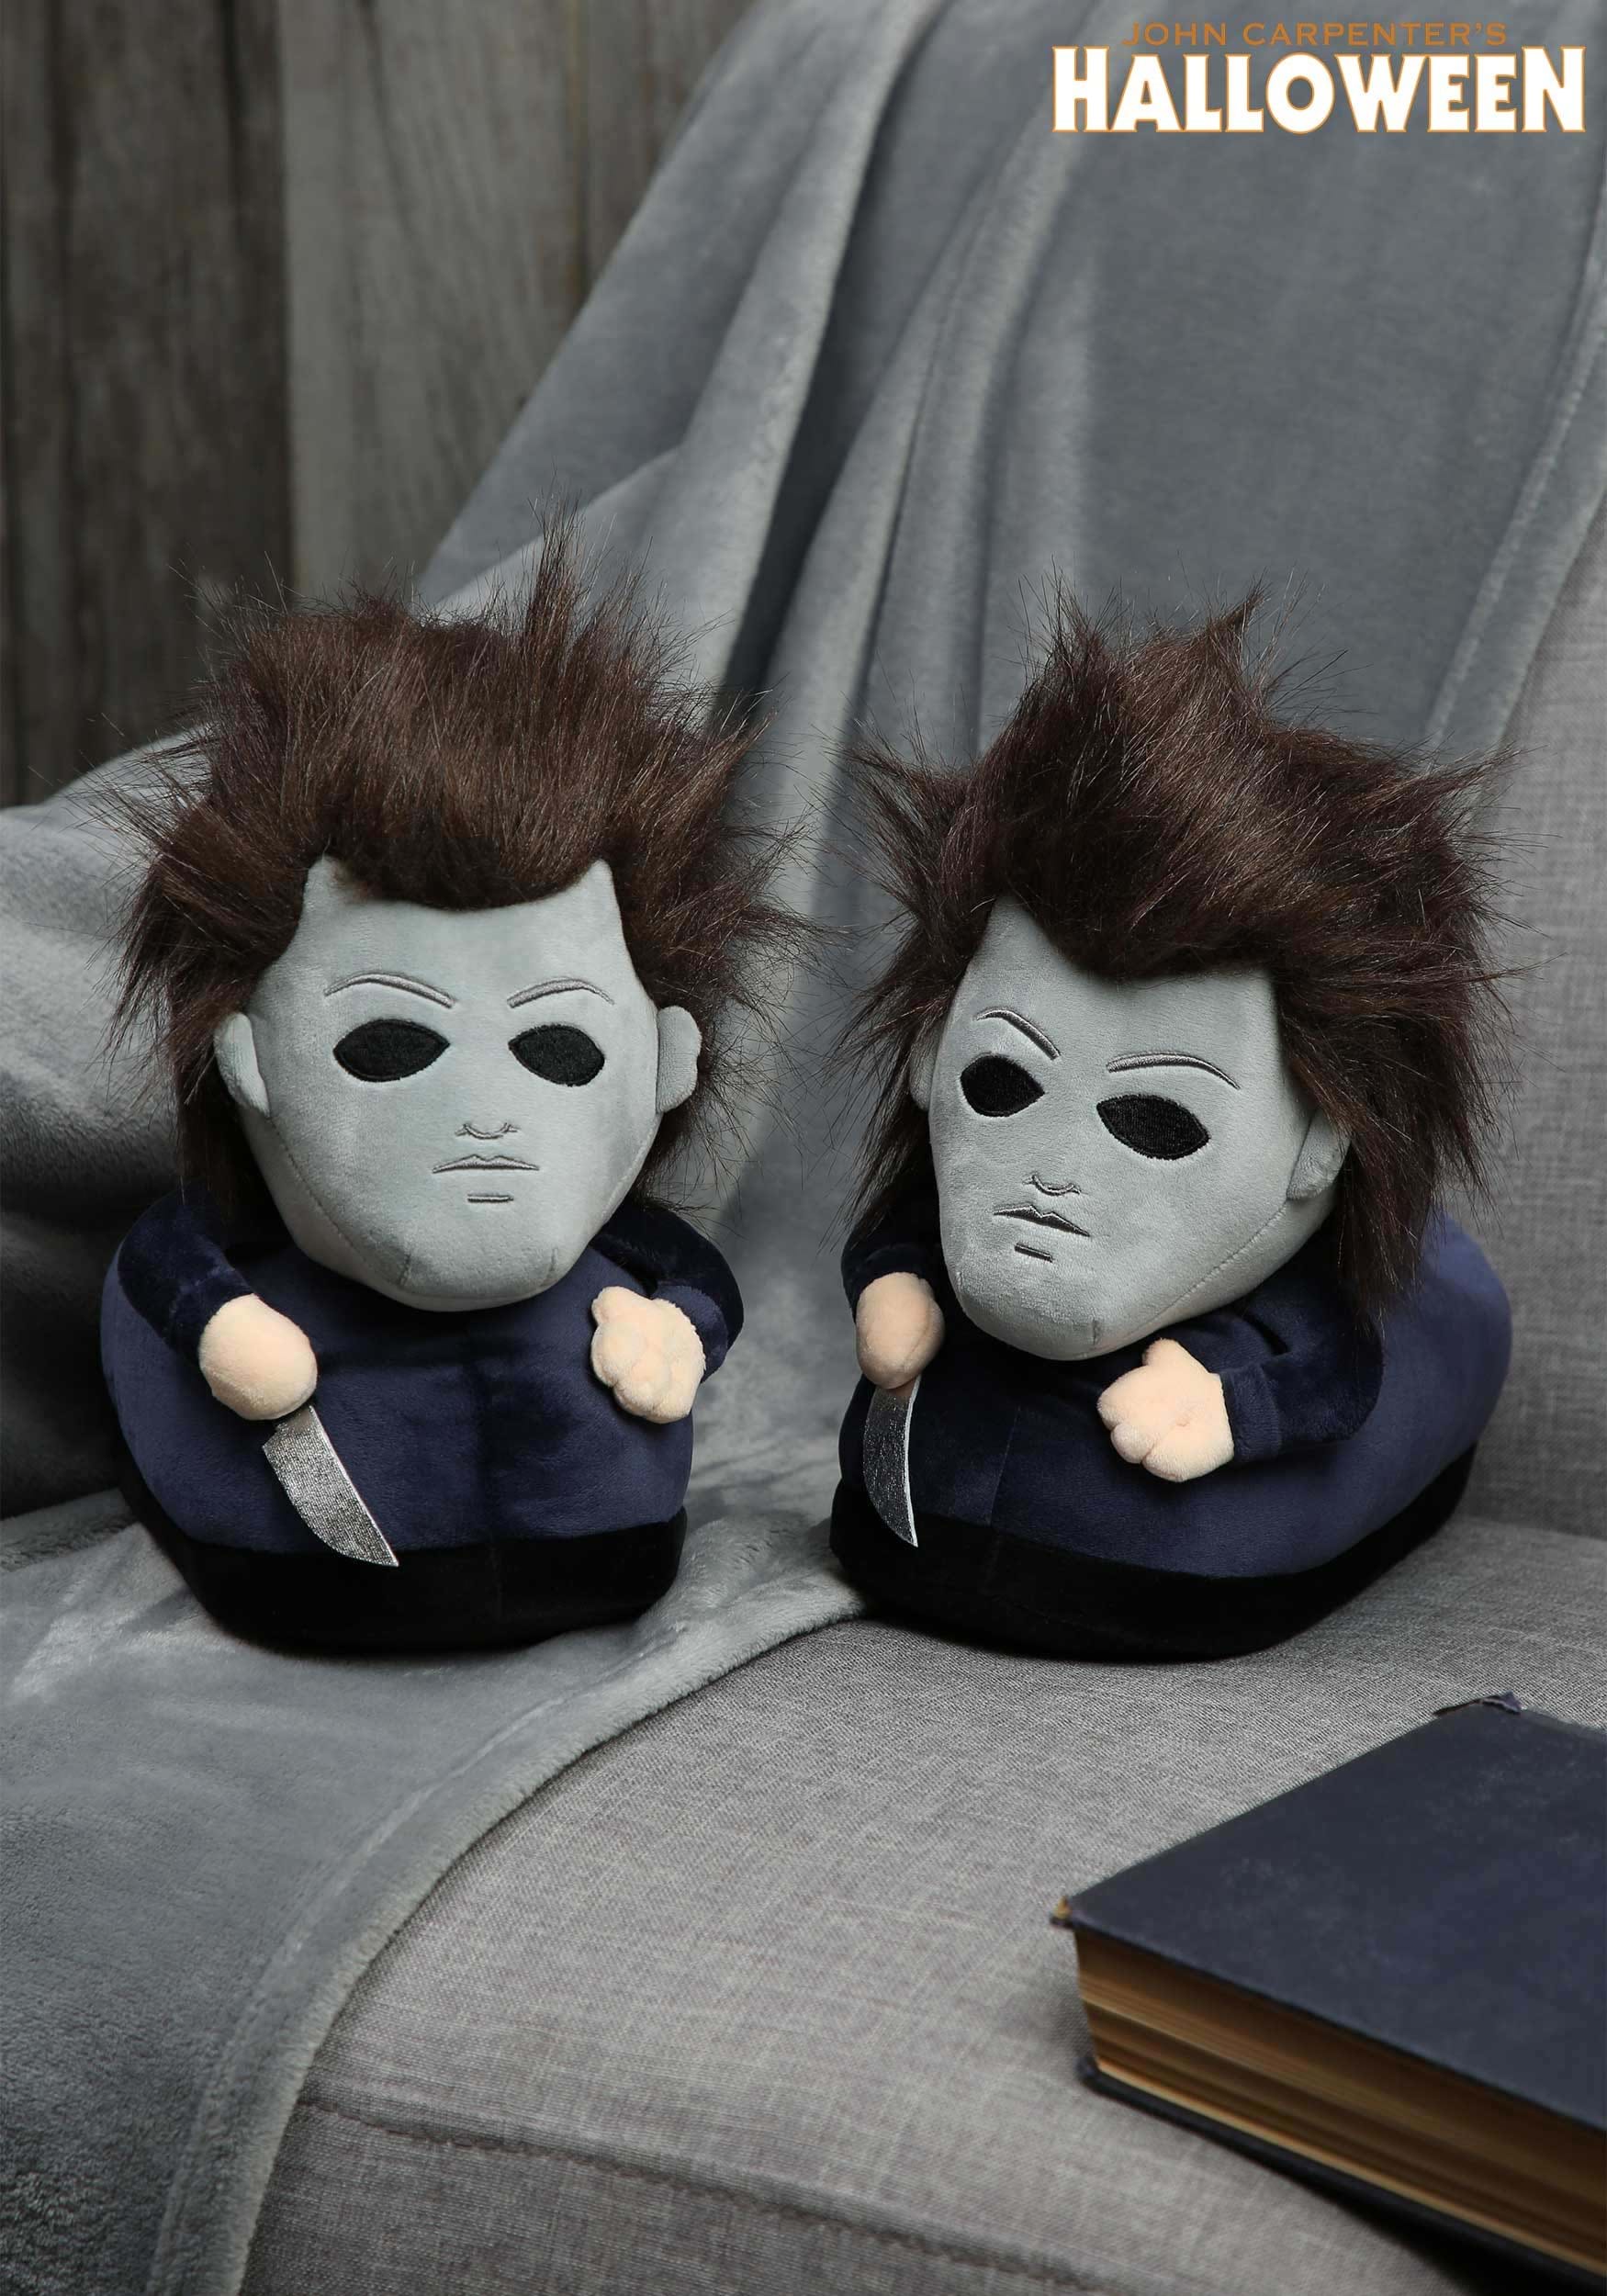 https://images.fun.com/products/70552/1-1/michael-myers-slippers-update.jpg